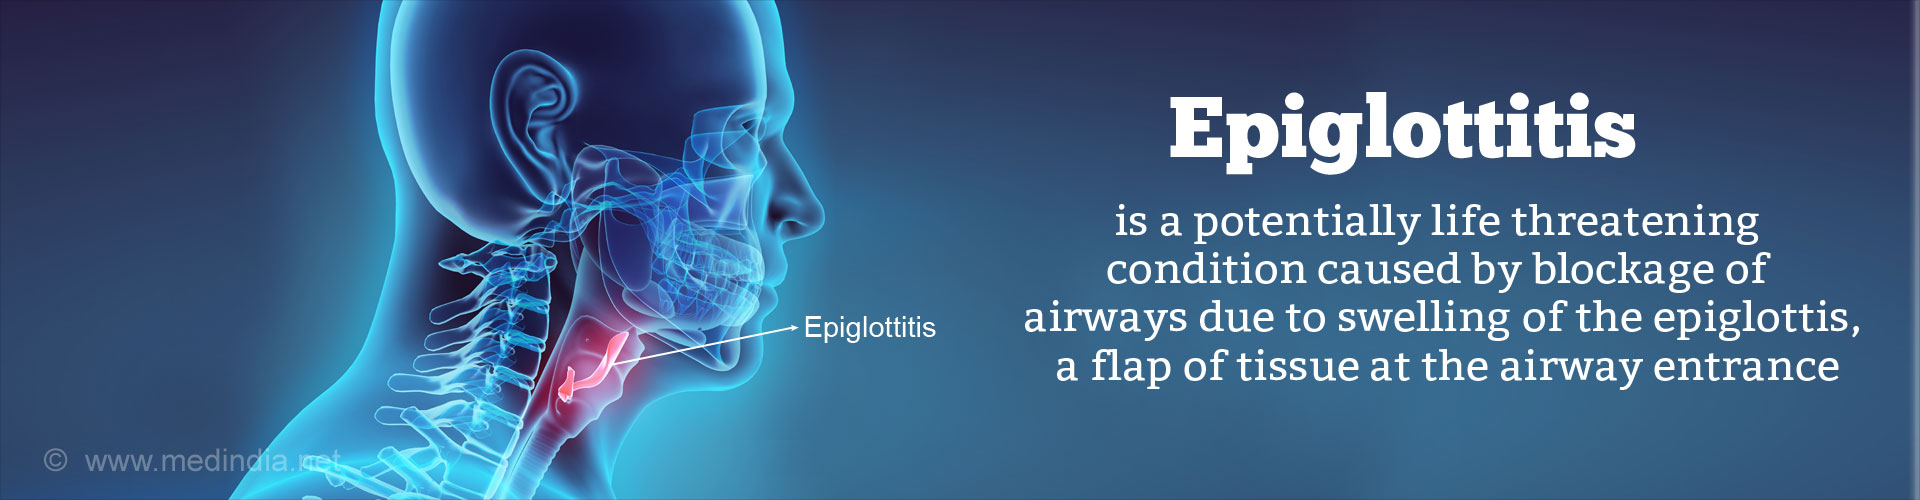 Epiglottitis is a potentially life threatening condition caused by blockage of airways due to swelling of the epiglottis, a flap of tissue at the airway entrance